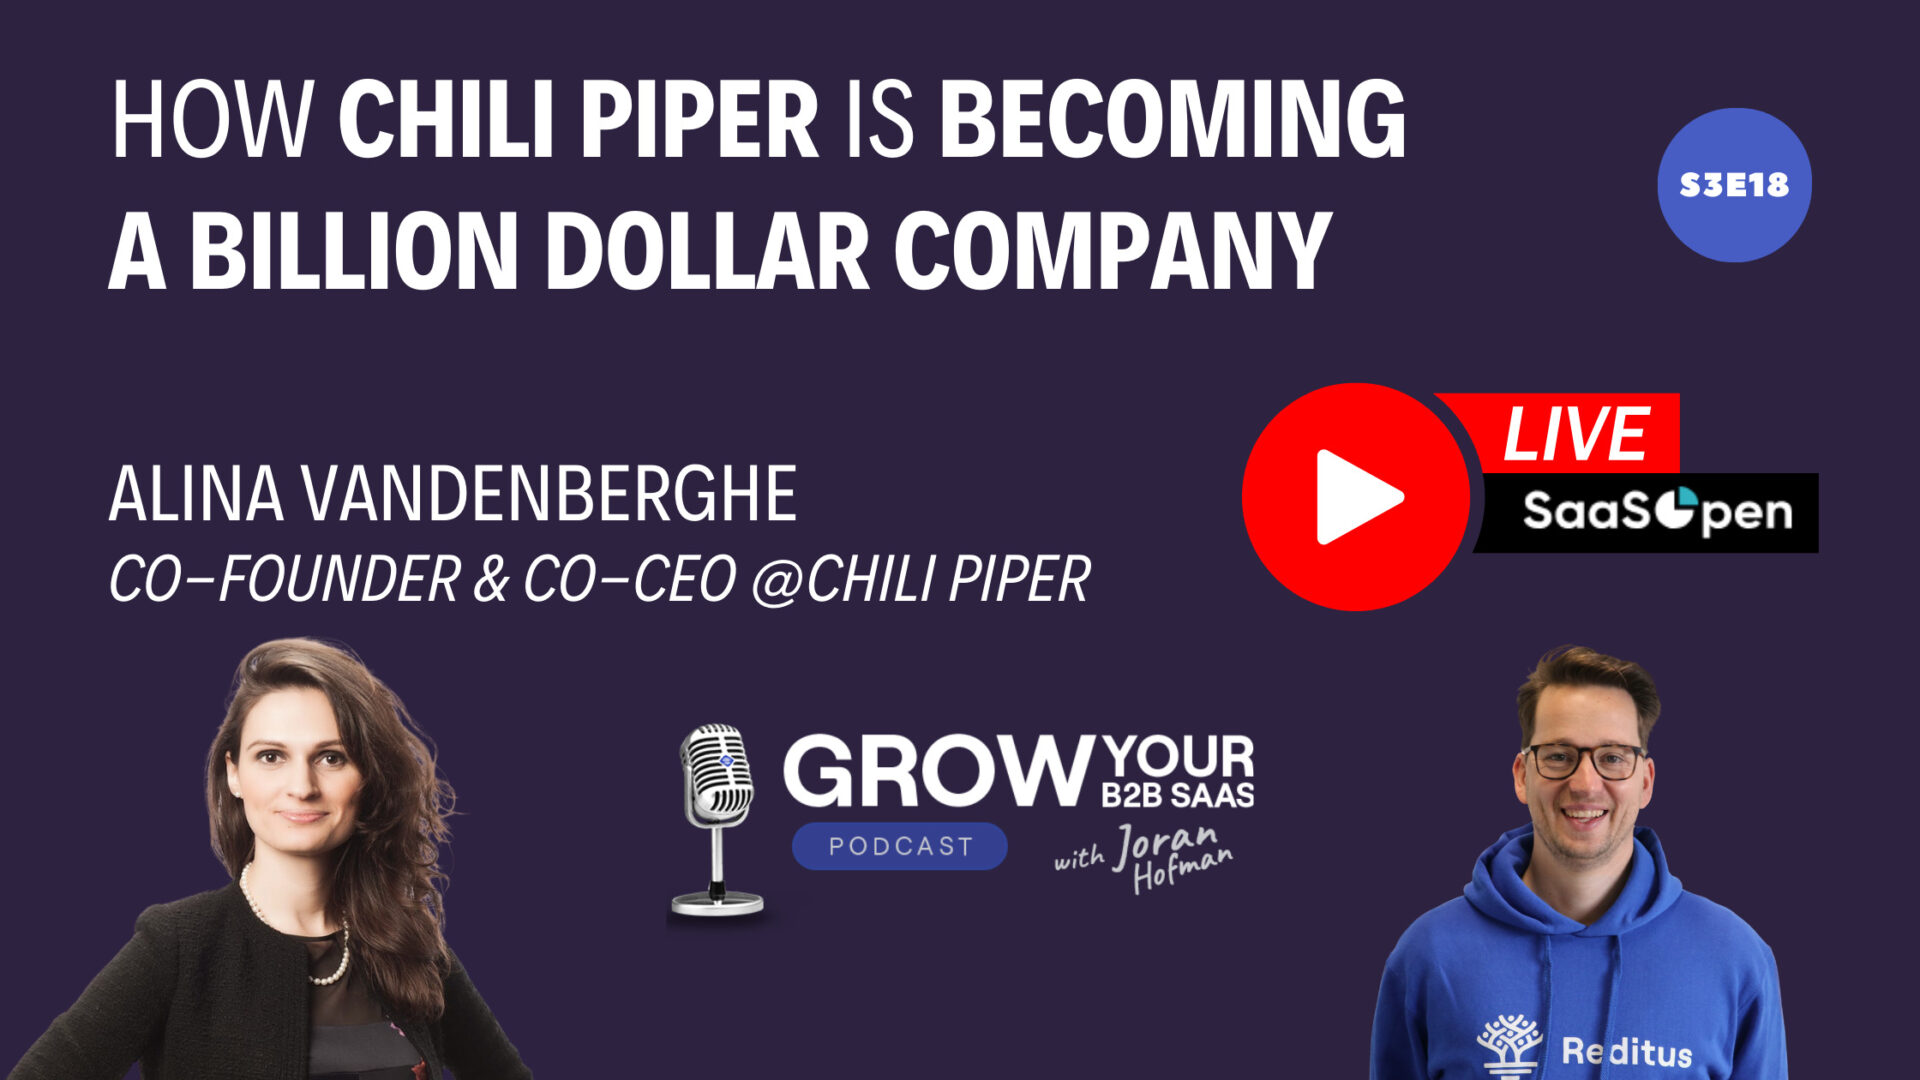 https://www.getreditus.com/podcast/s3e18-how-chili-piper-is-becoming-a-billion-dollar-company-with-alina-vandenberghe/